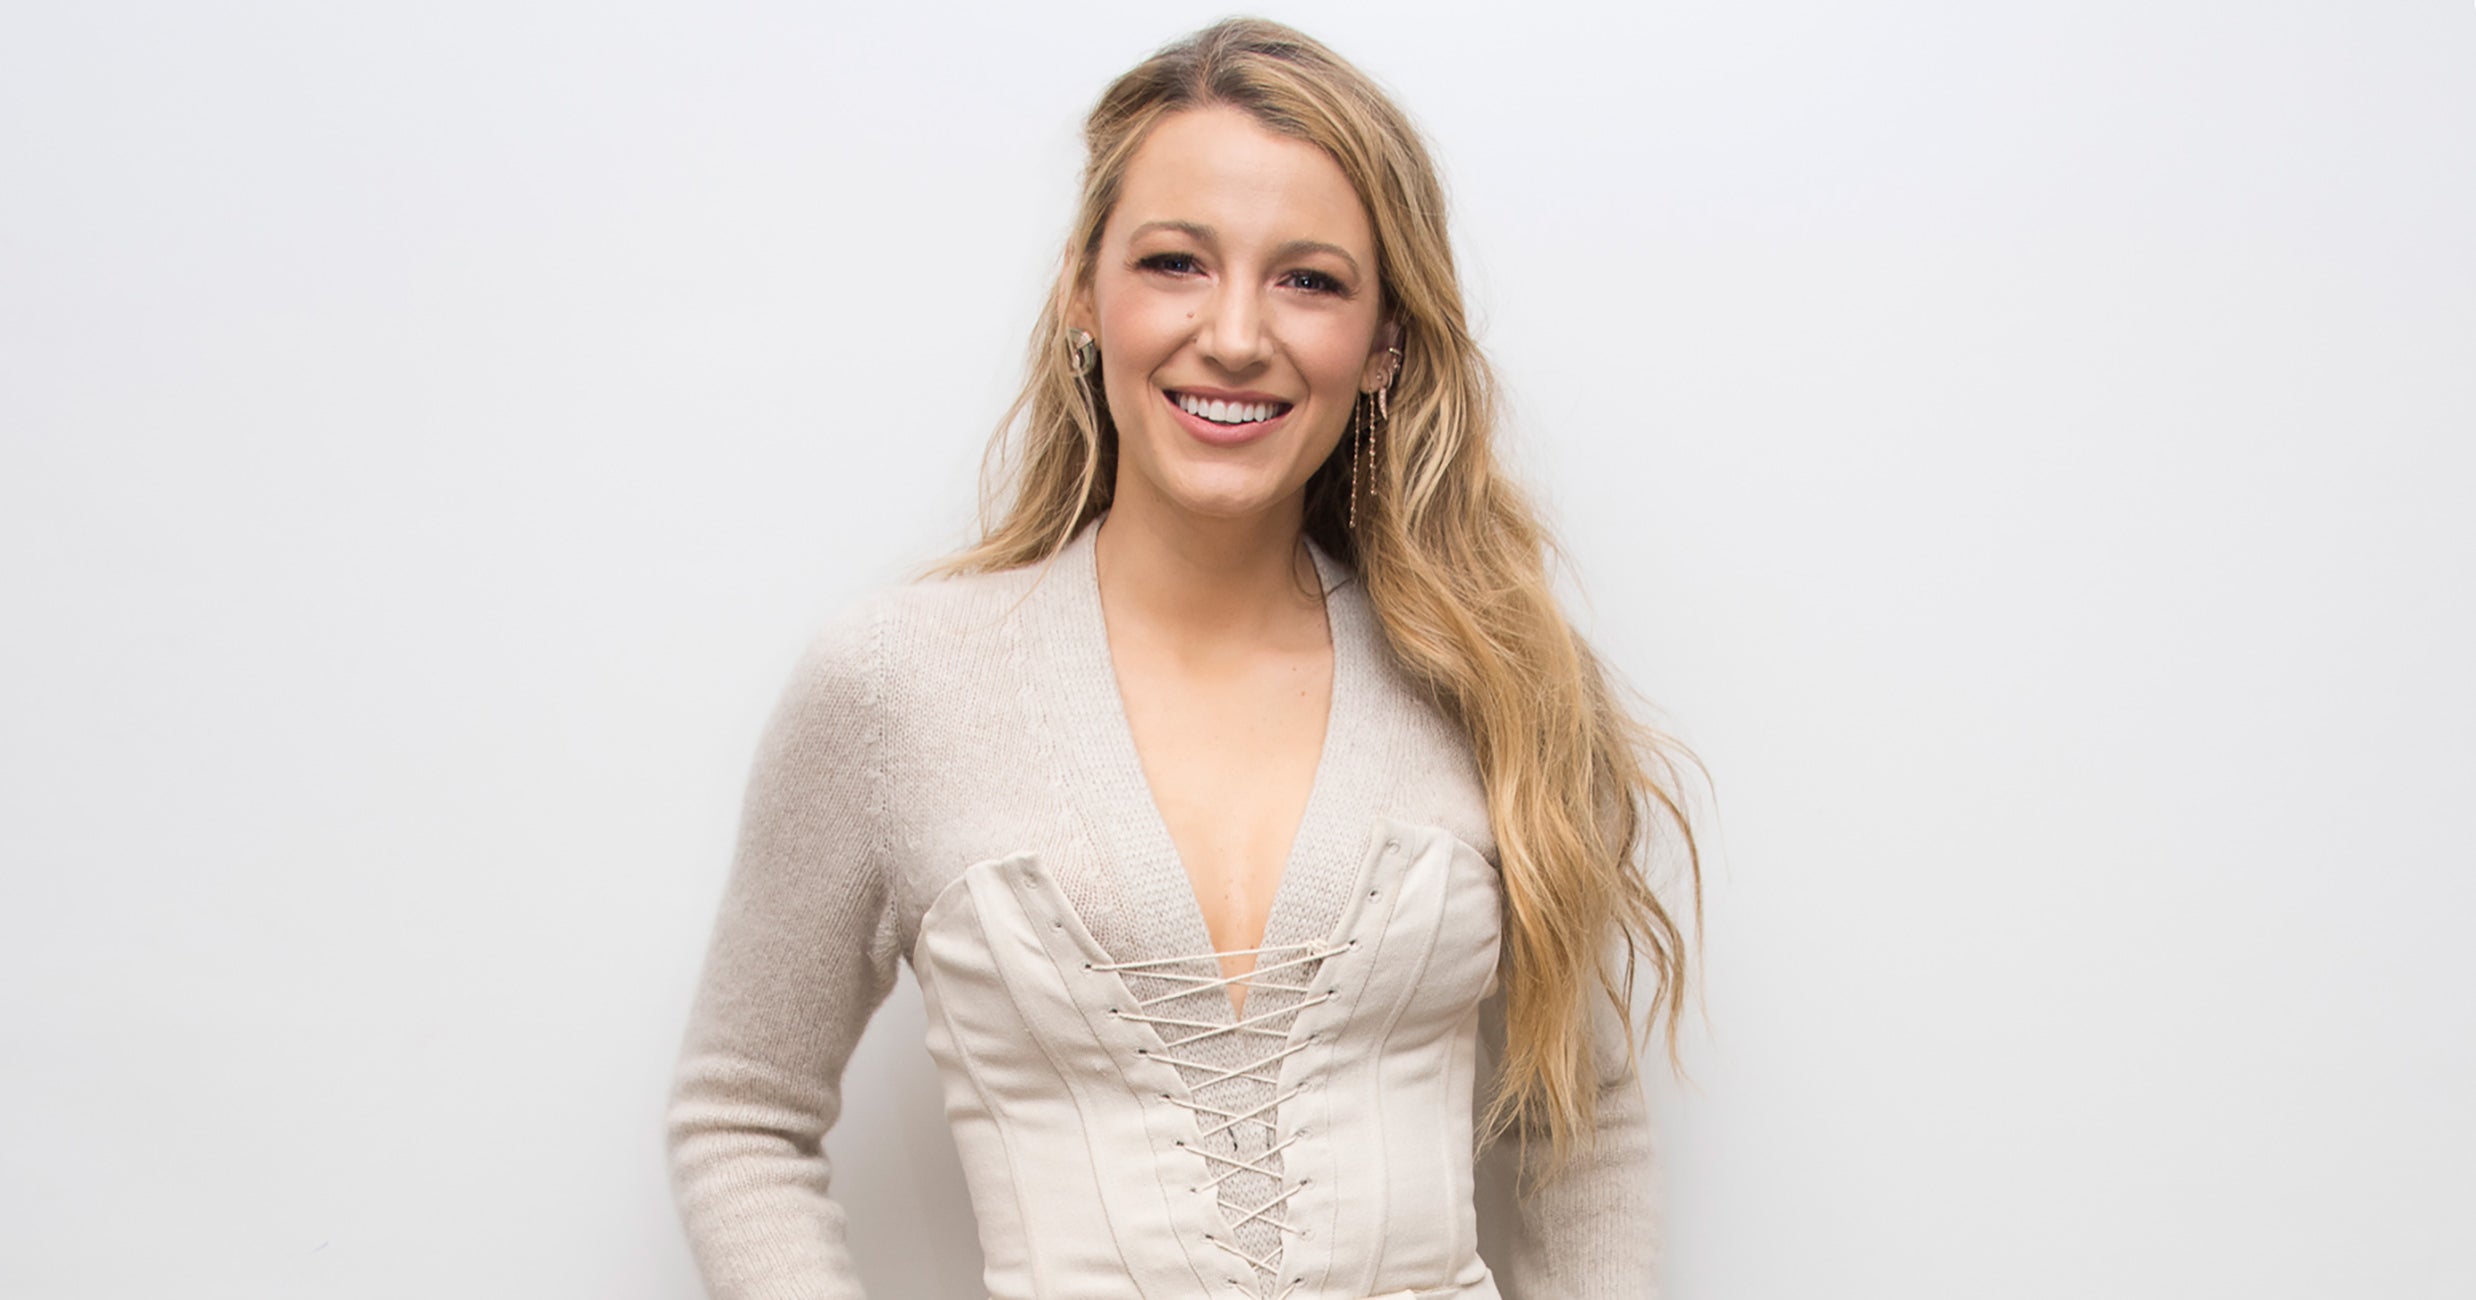 Blake Lively Draws on Louboutin Heels in Voting Pic